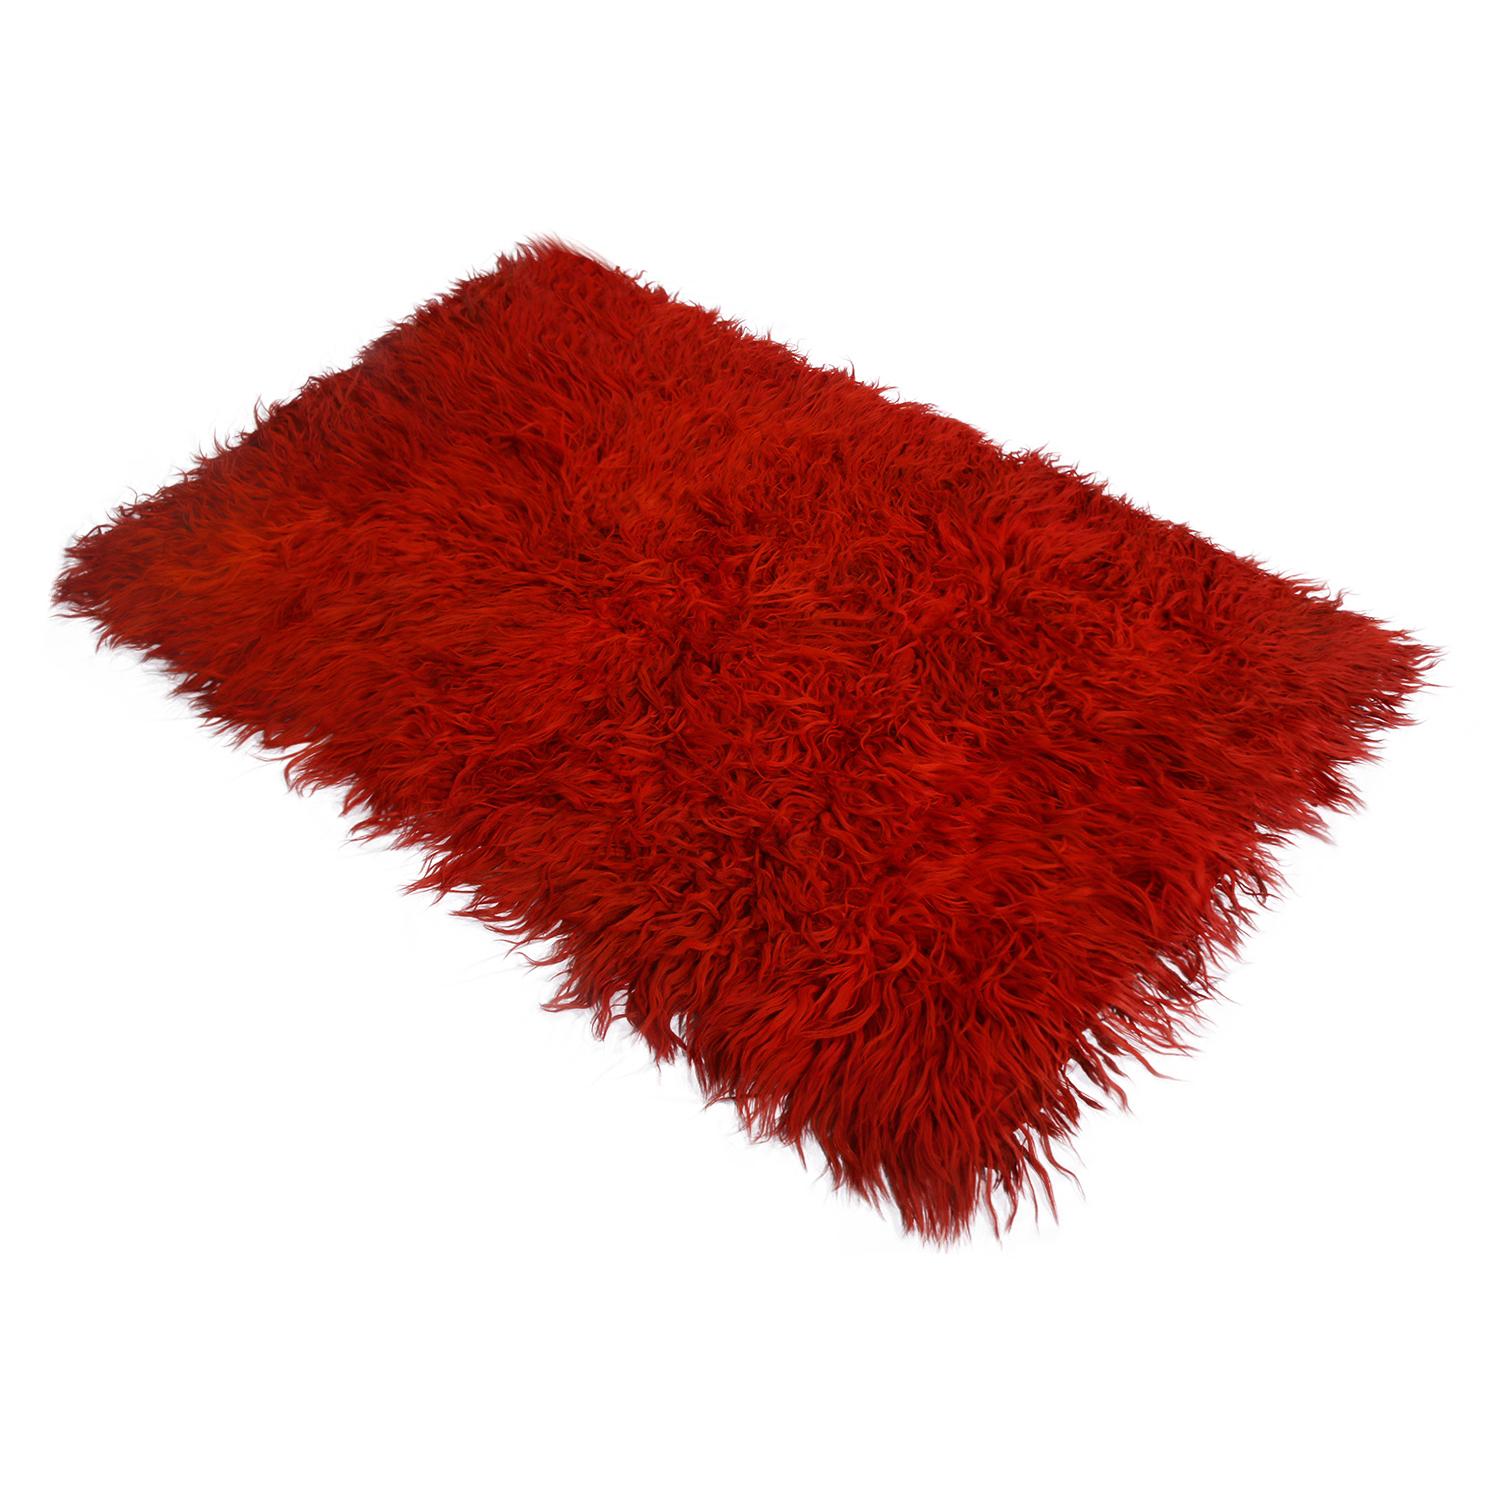 Hand knotted in Turkey originating between 1950-1960, this vintage midcentury Tulu rug offers a distinguished shag pile height with an inviting, plush texture, complemented by the rich, radiant crimson red colorway as well as the versatile size of